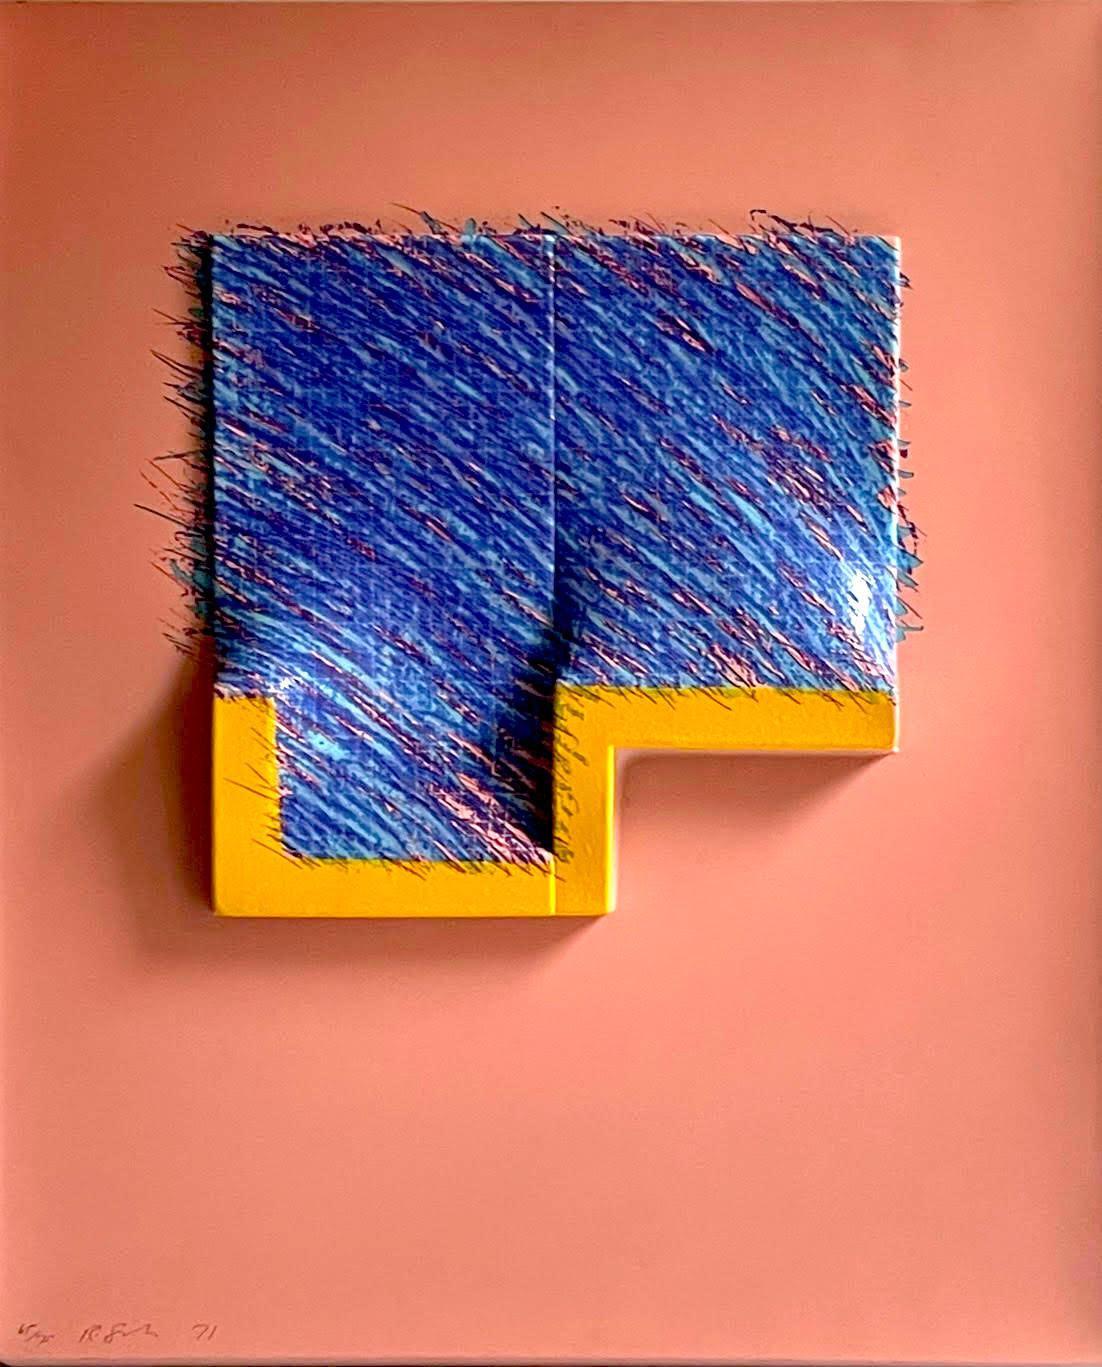 Richard Smith
Seven from Logo Suite (Pink Blue), 1971
Silkscreen on 3-D Molded Plastic Over Wood
Pencil signed, dated and numbered 65 from the edition of 75 on the front
23 1/2 × 19 1/2 × 3 inches
Unframed (though this work can be hung without